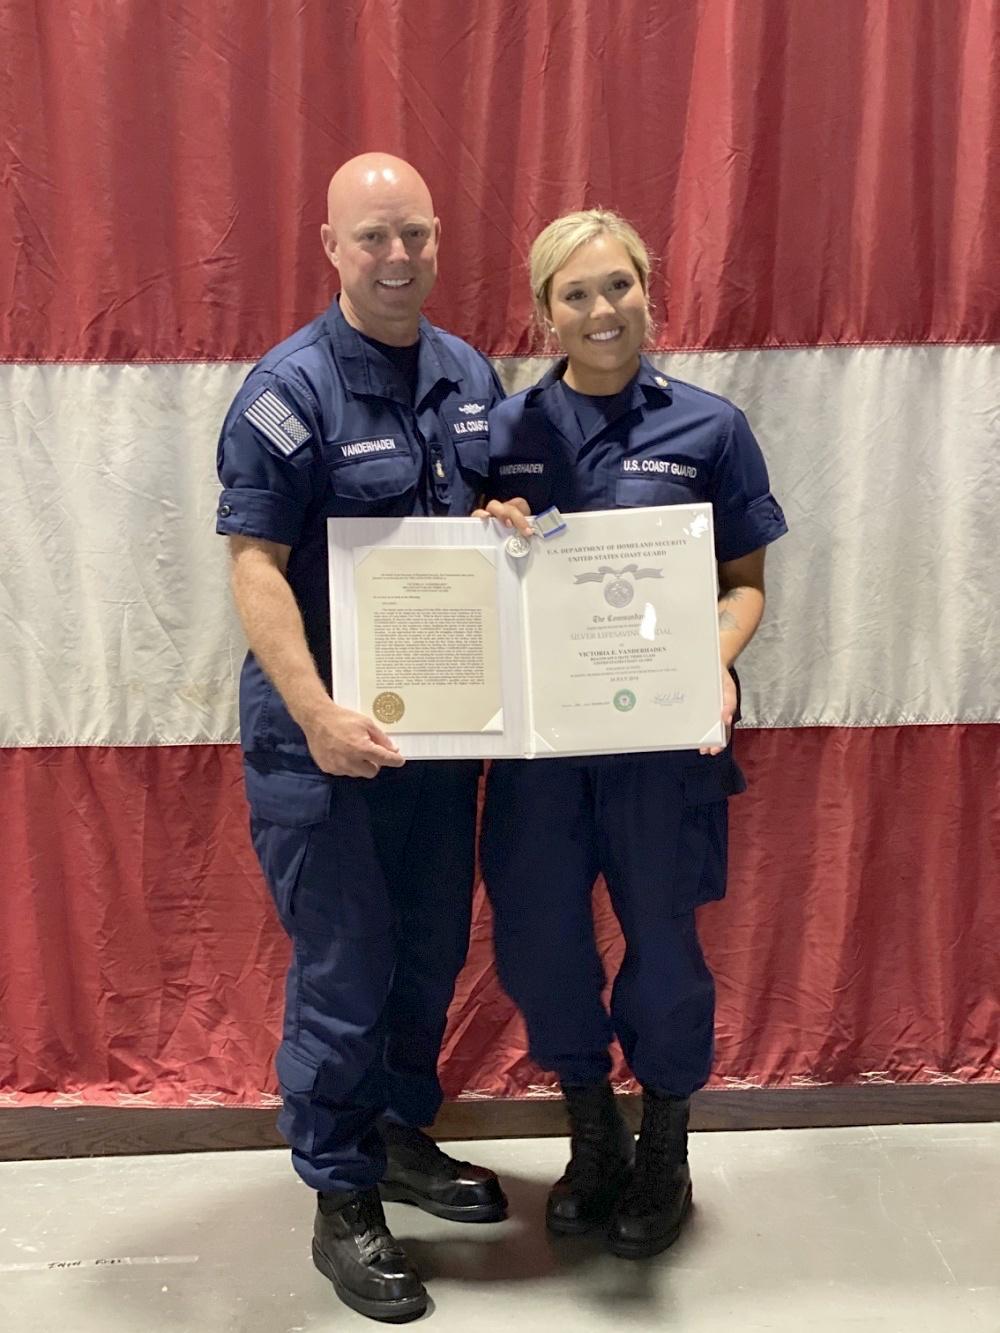 Master Chief Petty Officer Jason M. Vanderhaden with his daughter, Petty Officer 2nd Class Victoria Vanderhaden, in Mobile, Alabama, on July 20, 2020 (Chief Petty Officer Crystalynn Kneen/U.S. Coast Guard)